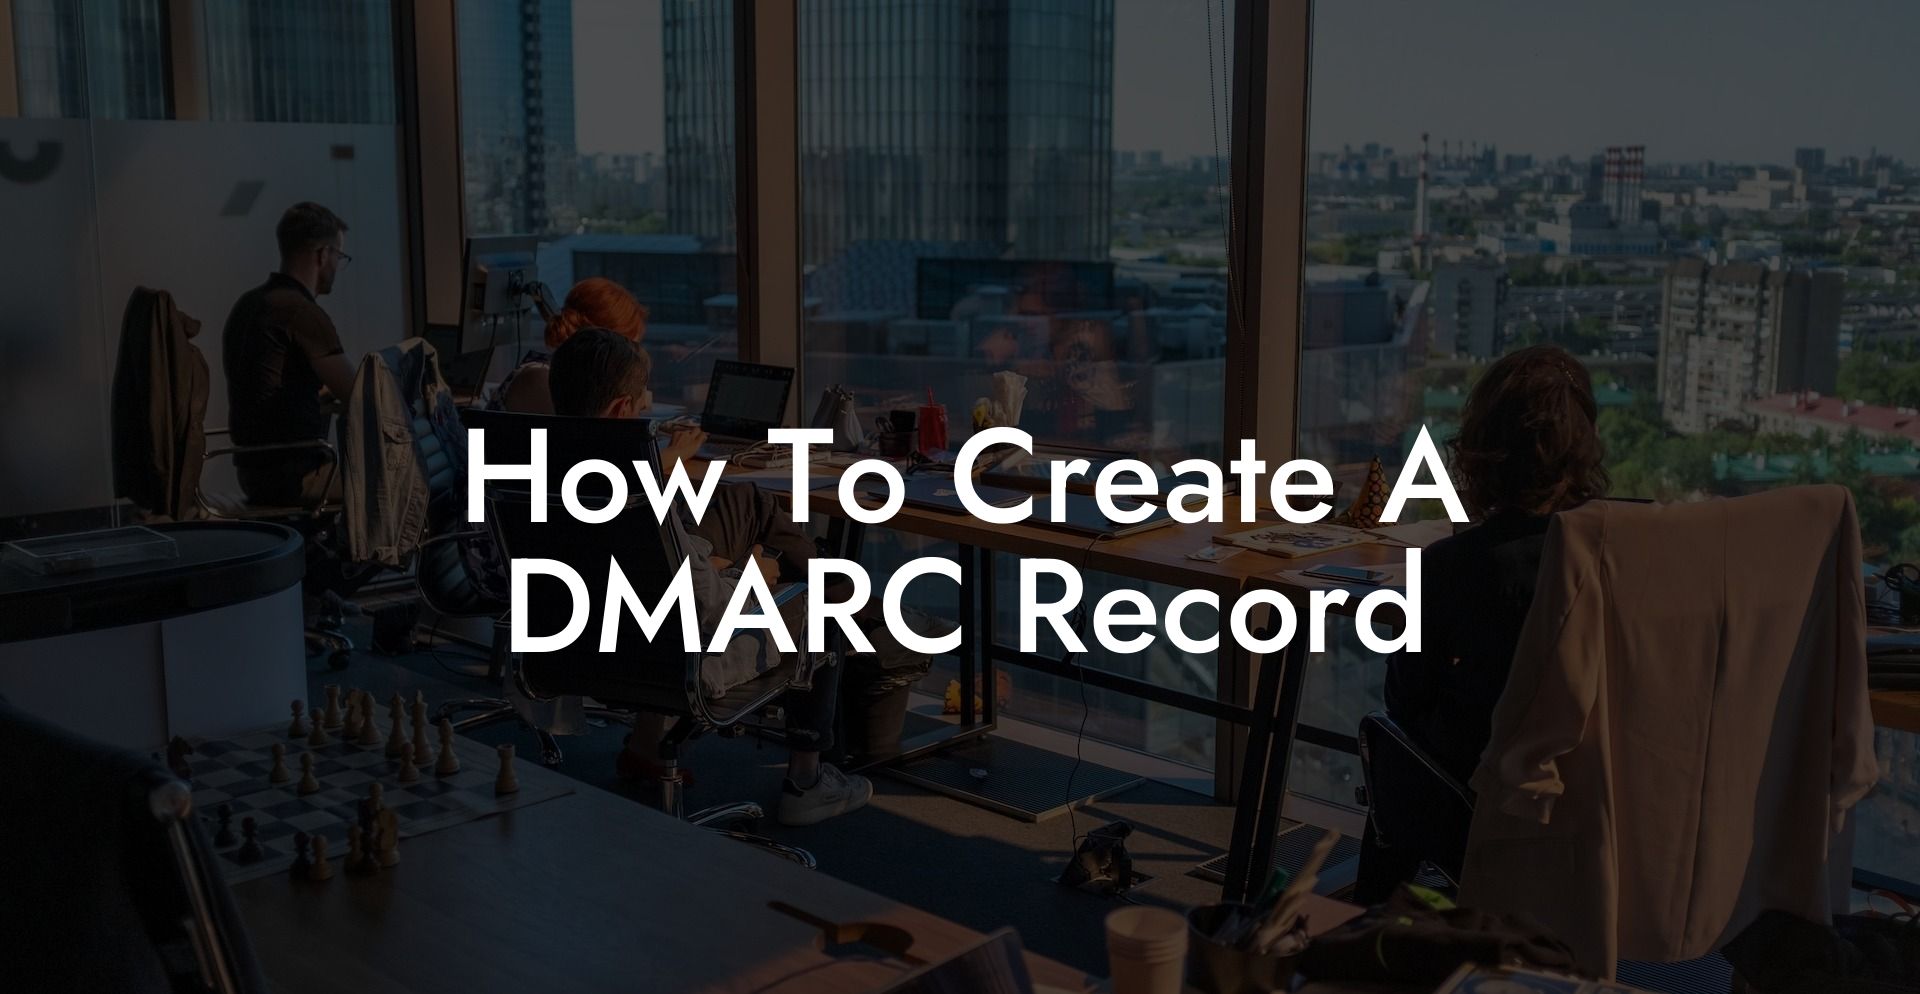 How To Create A DMARC Record